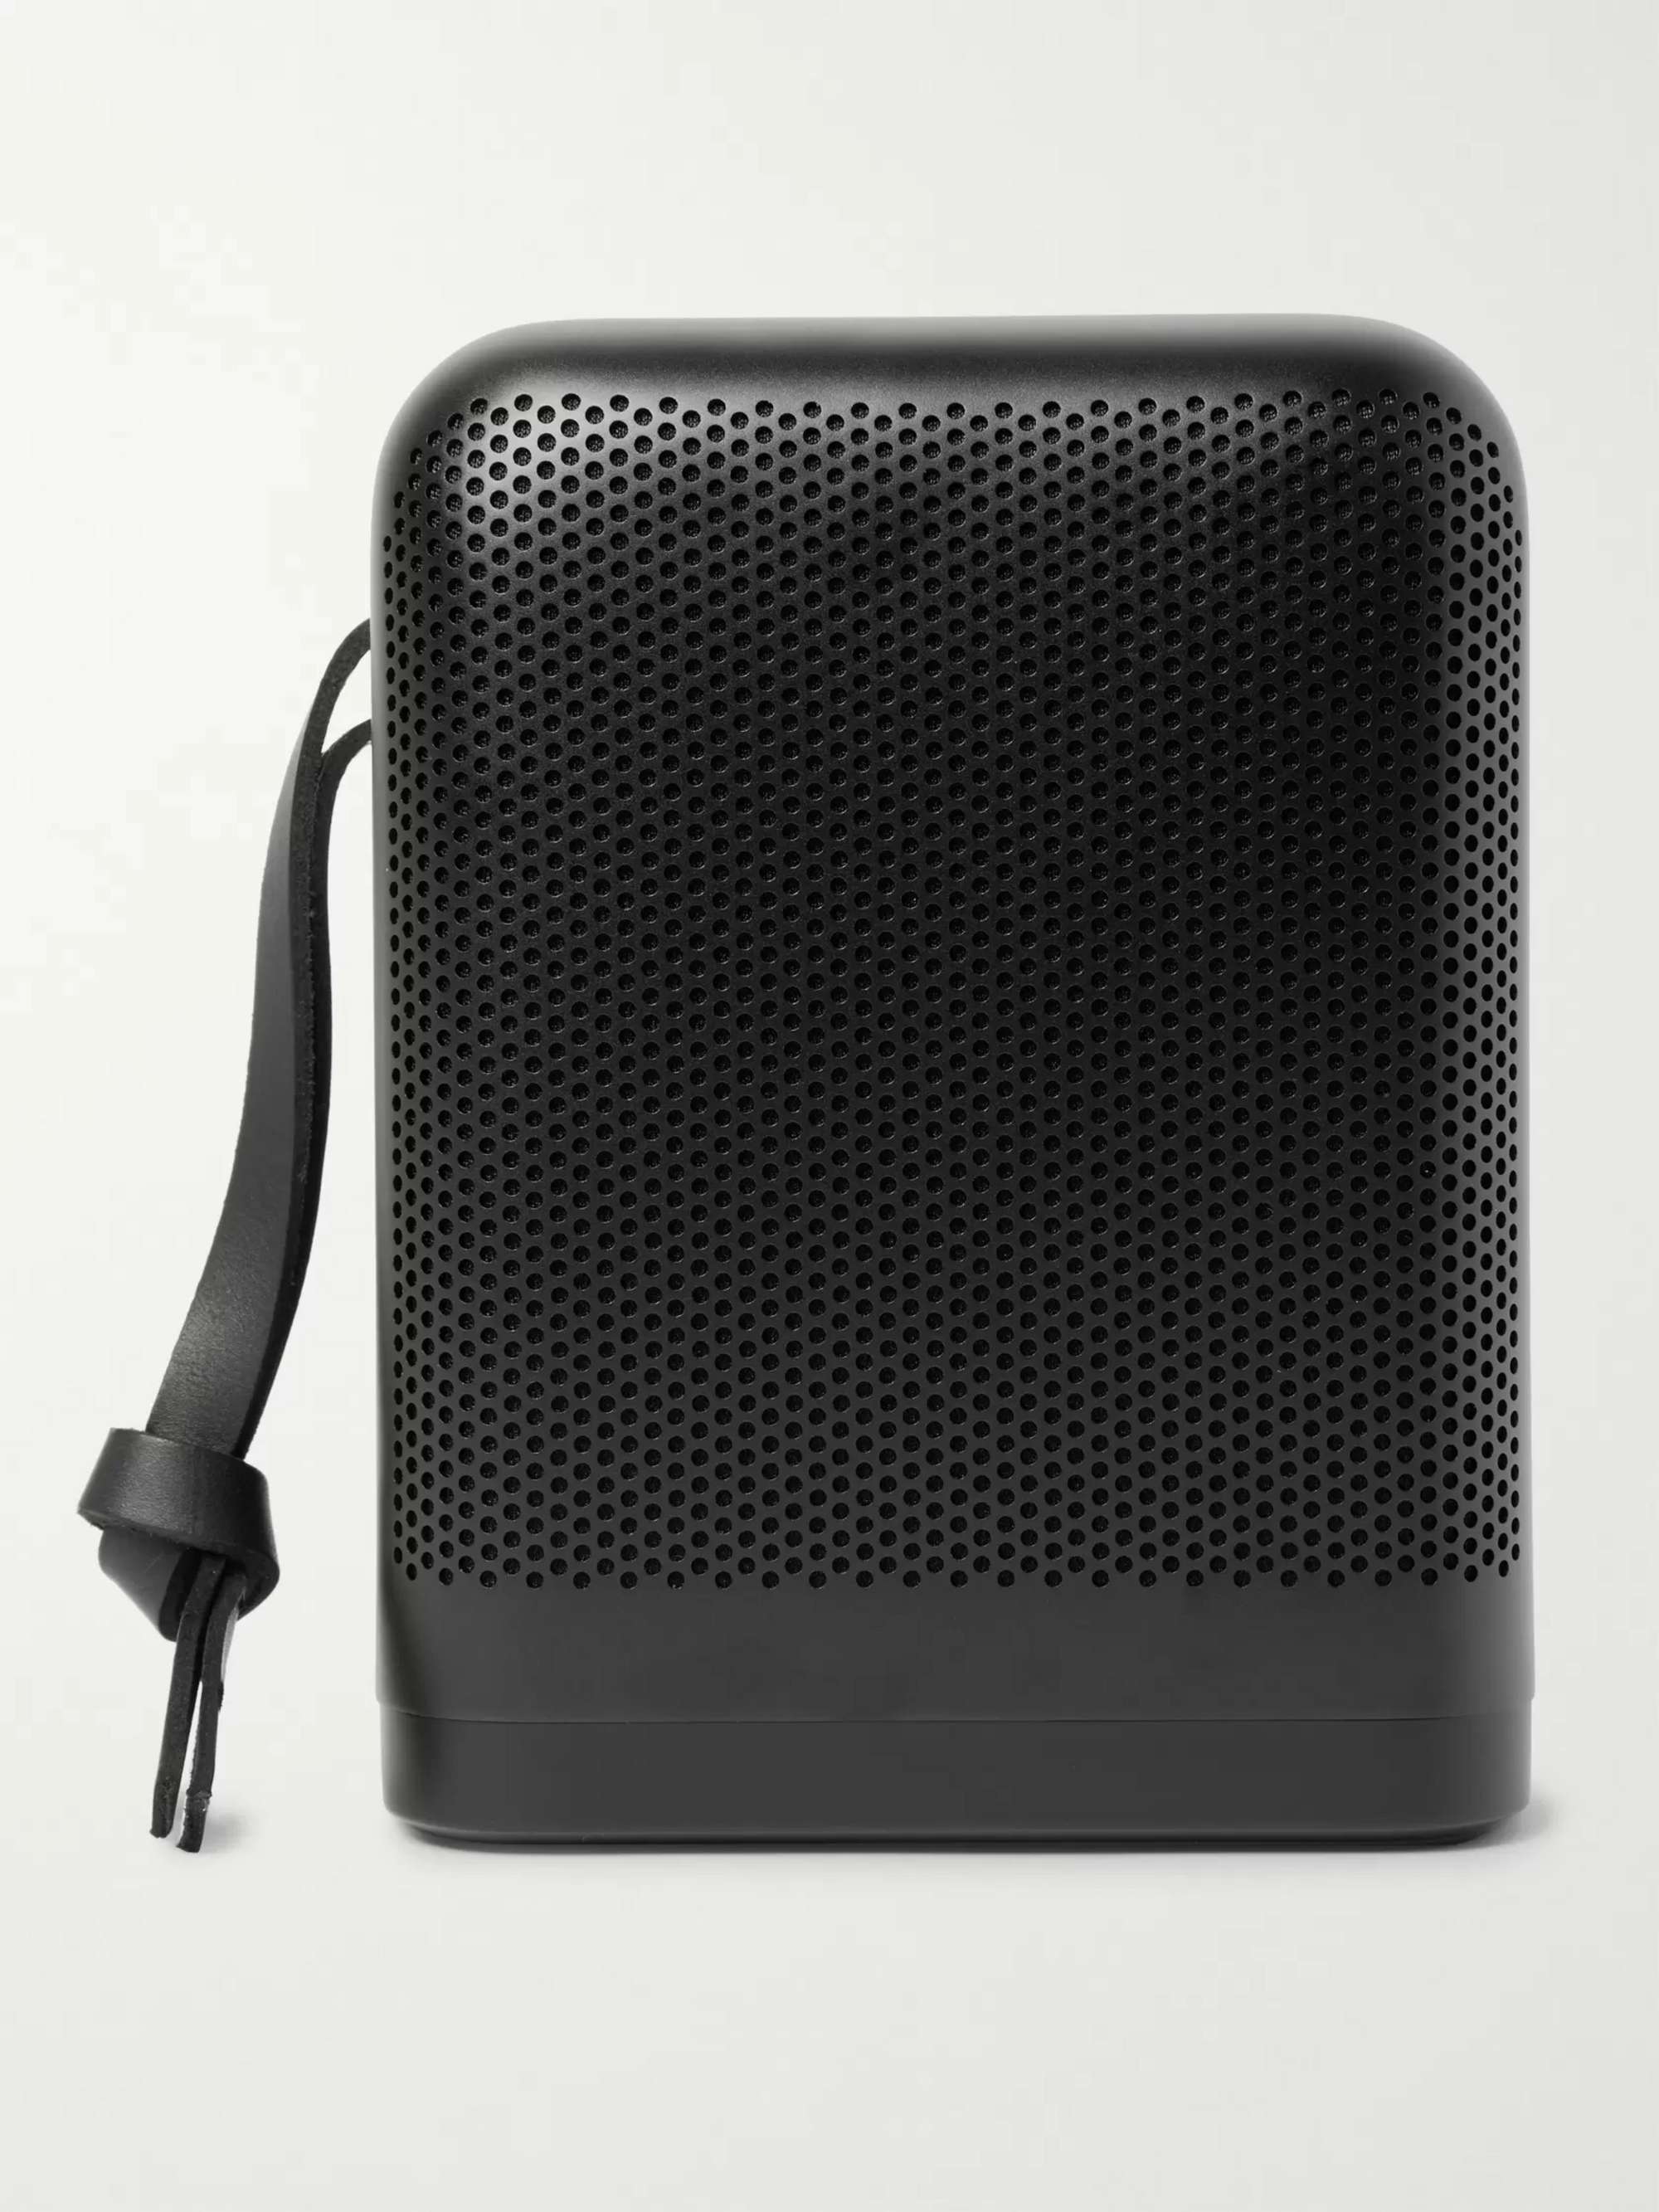 BANG & OLUFSEN BeoPlay P6 Portable Bluetooth Speaker